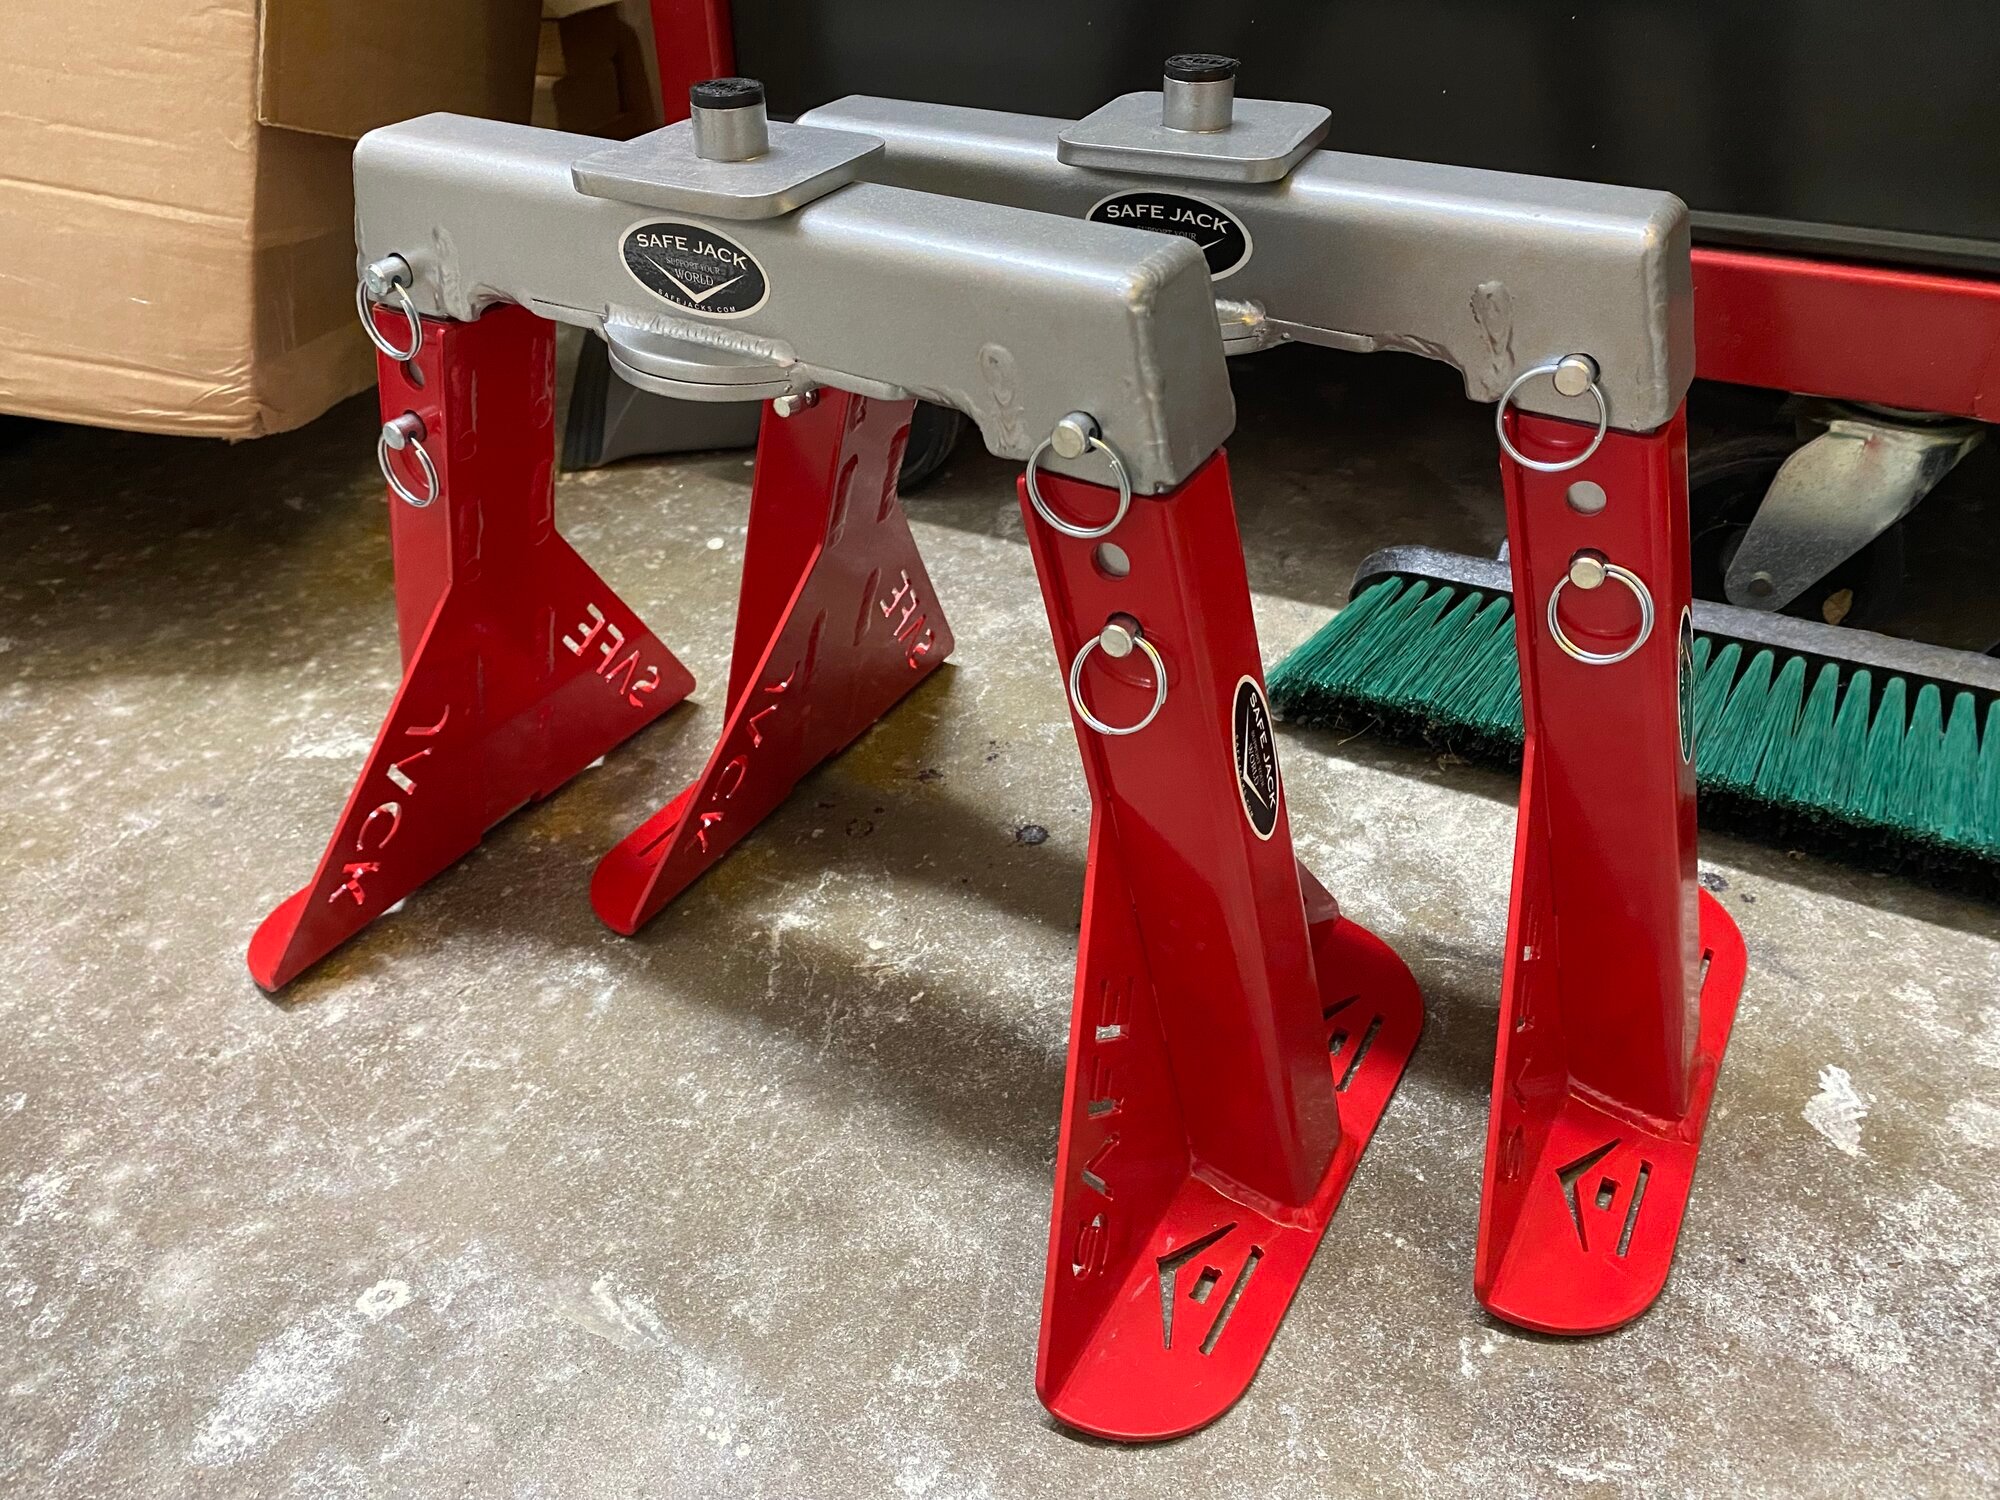 FS: pair of "Safe Jack"/"Rennstand" jack stands w/ Tesla-specific jack pads  in Racing Red finish - like new | Tesla Motors Club